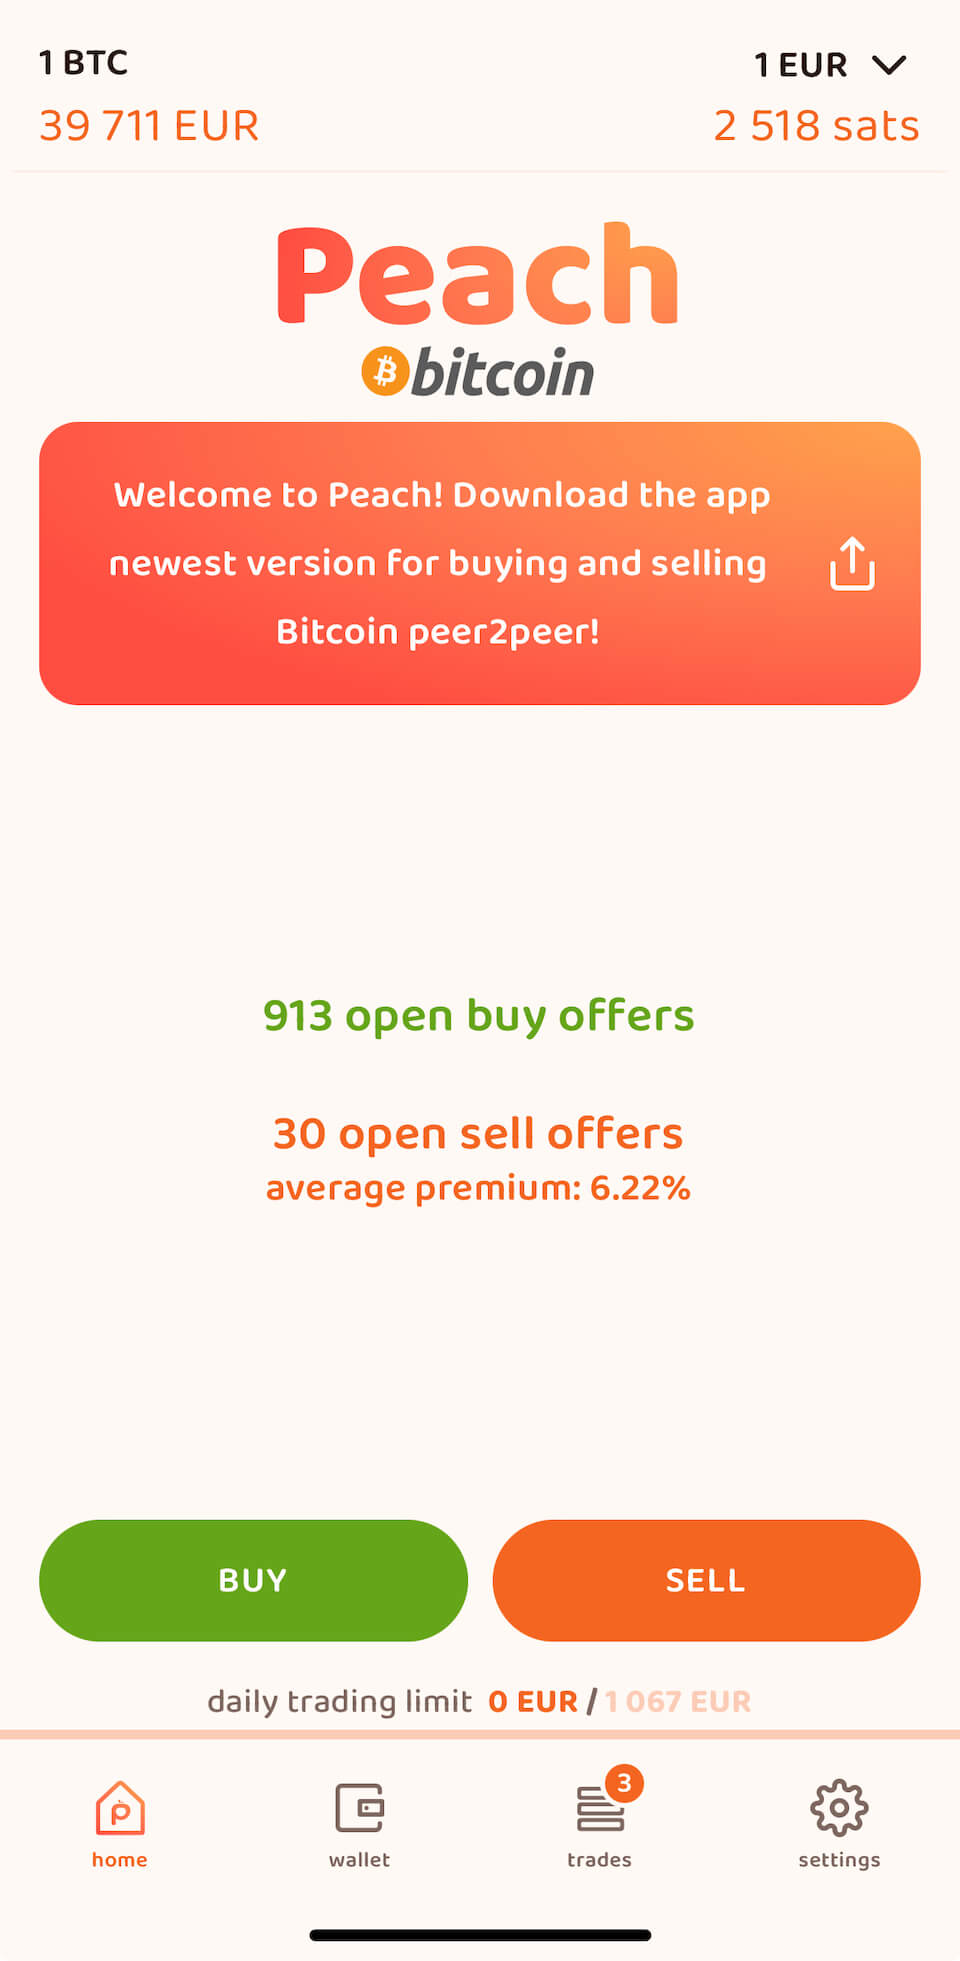 Peach 0.4, December: New UX again! Publish a sell and buy offer in one screen, live market data integration, instant-trade functionality, repeat trader badge, shareable news in the home page!